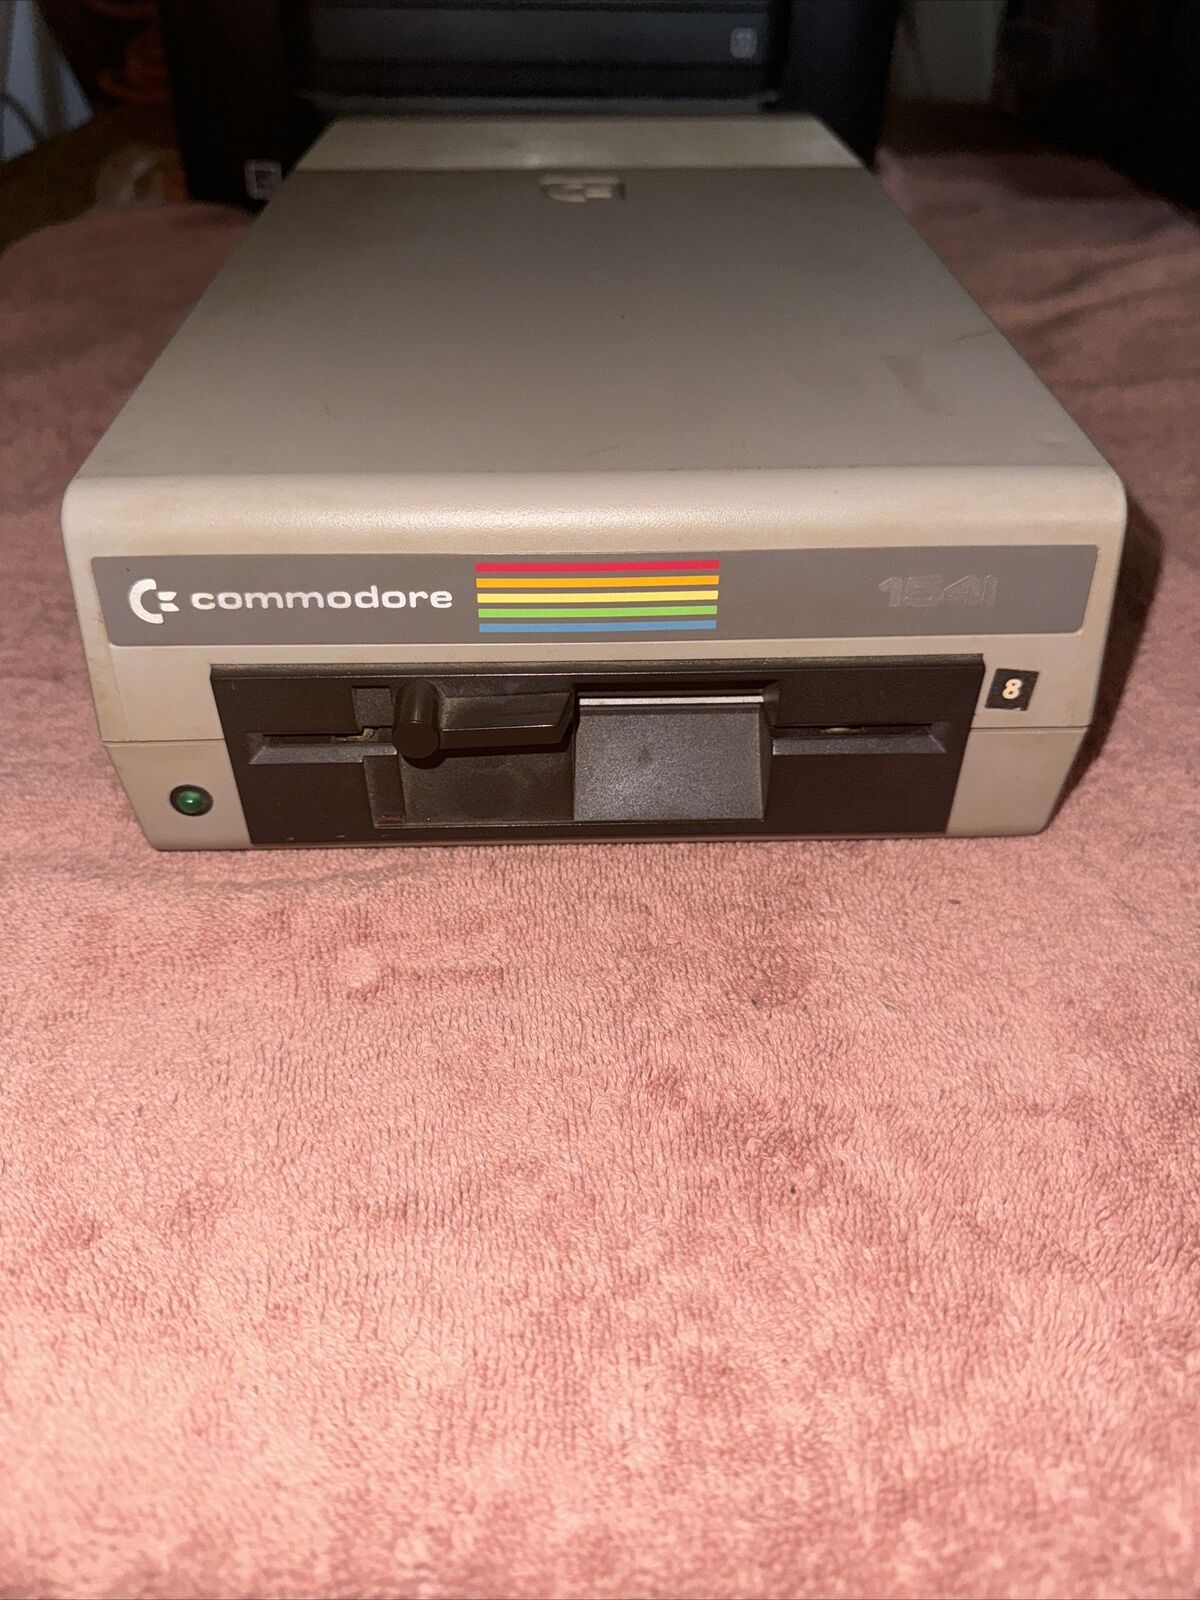 Commodore 1541 Floppy Disk Drive - Untested